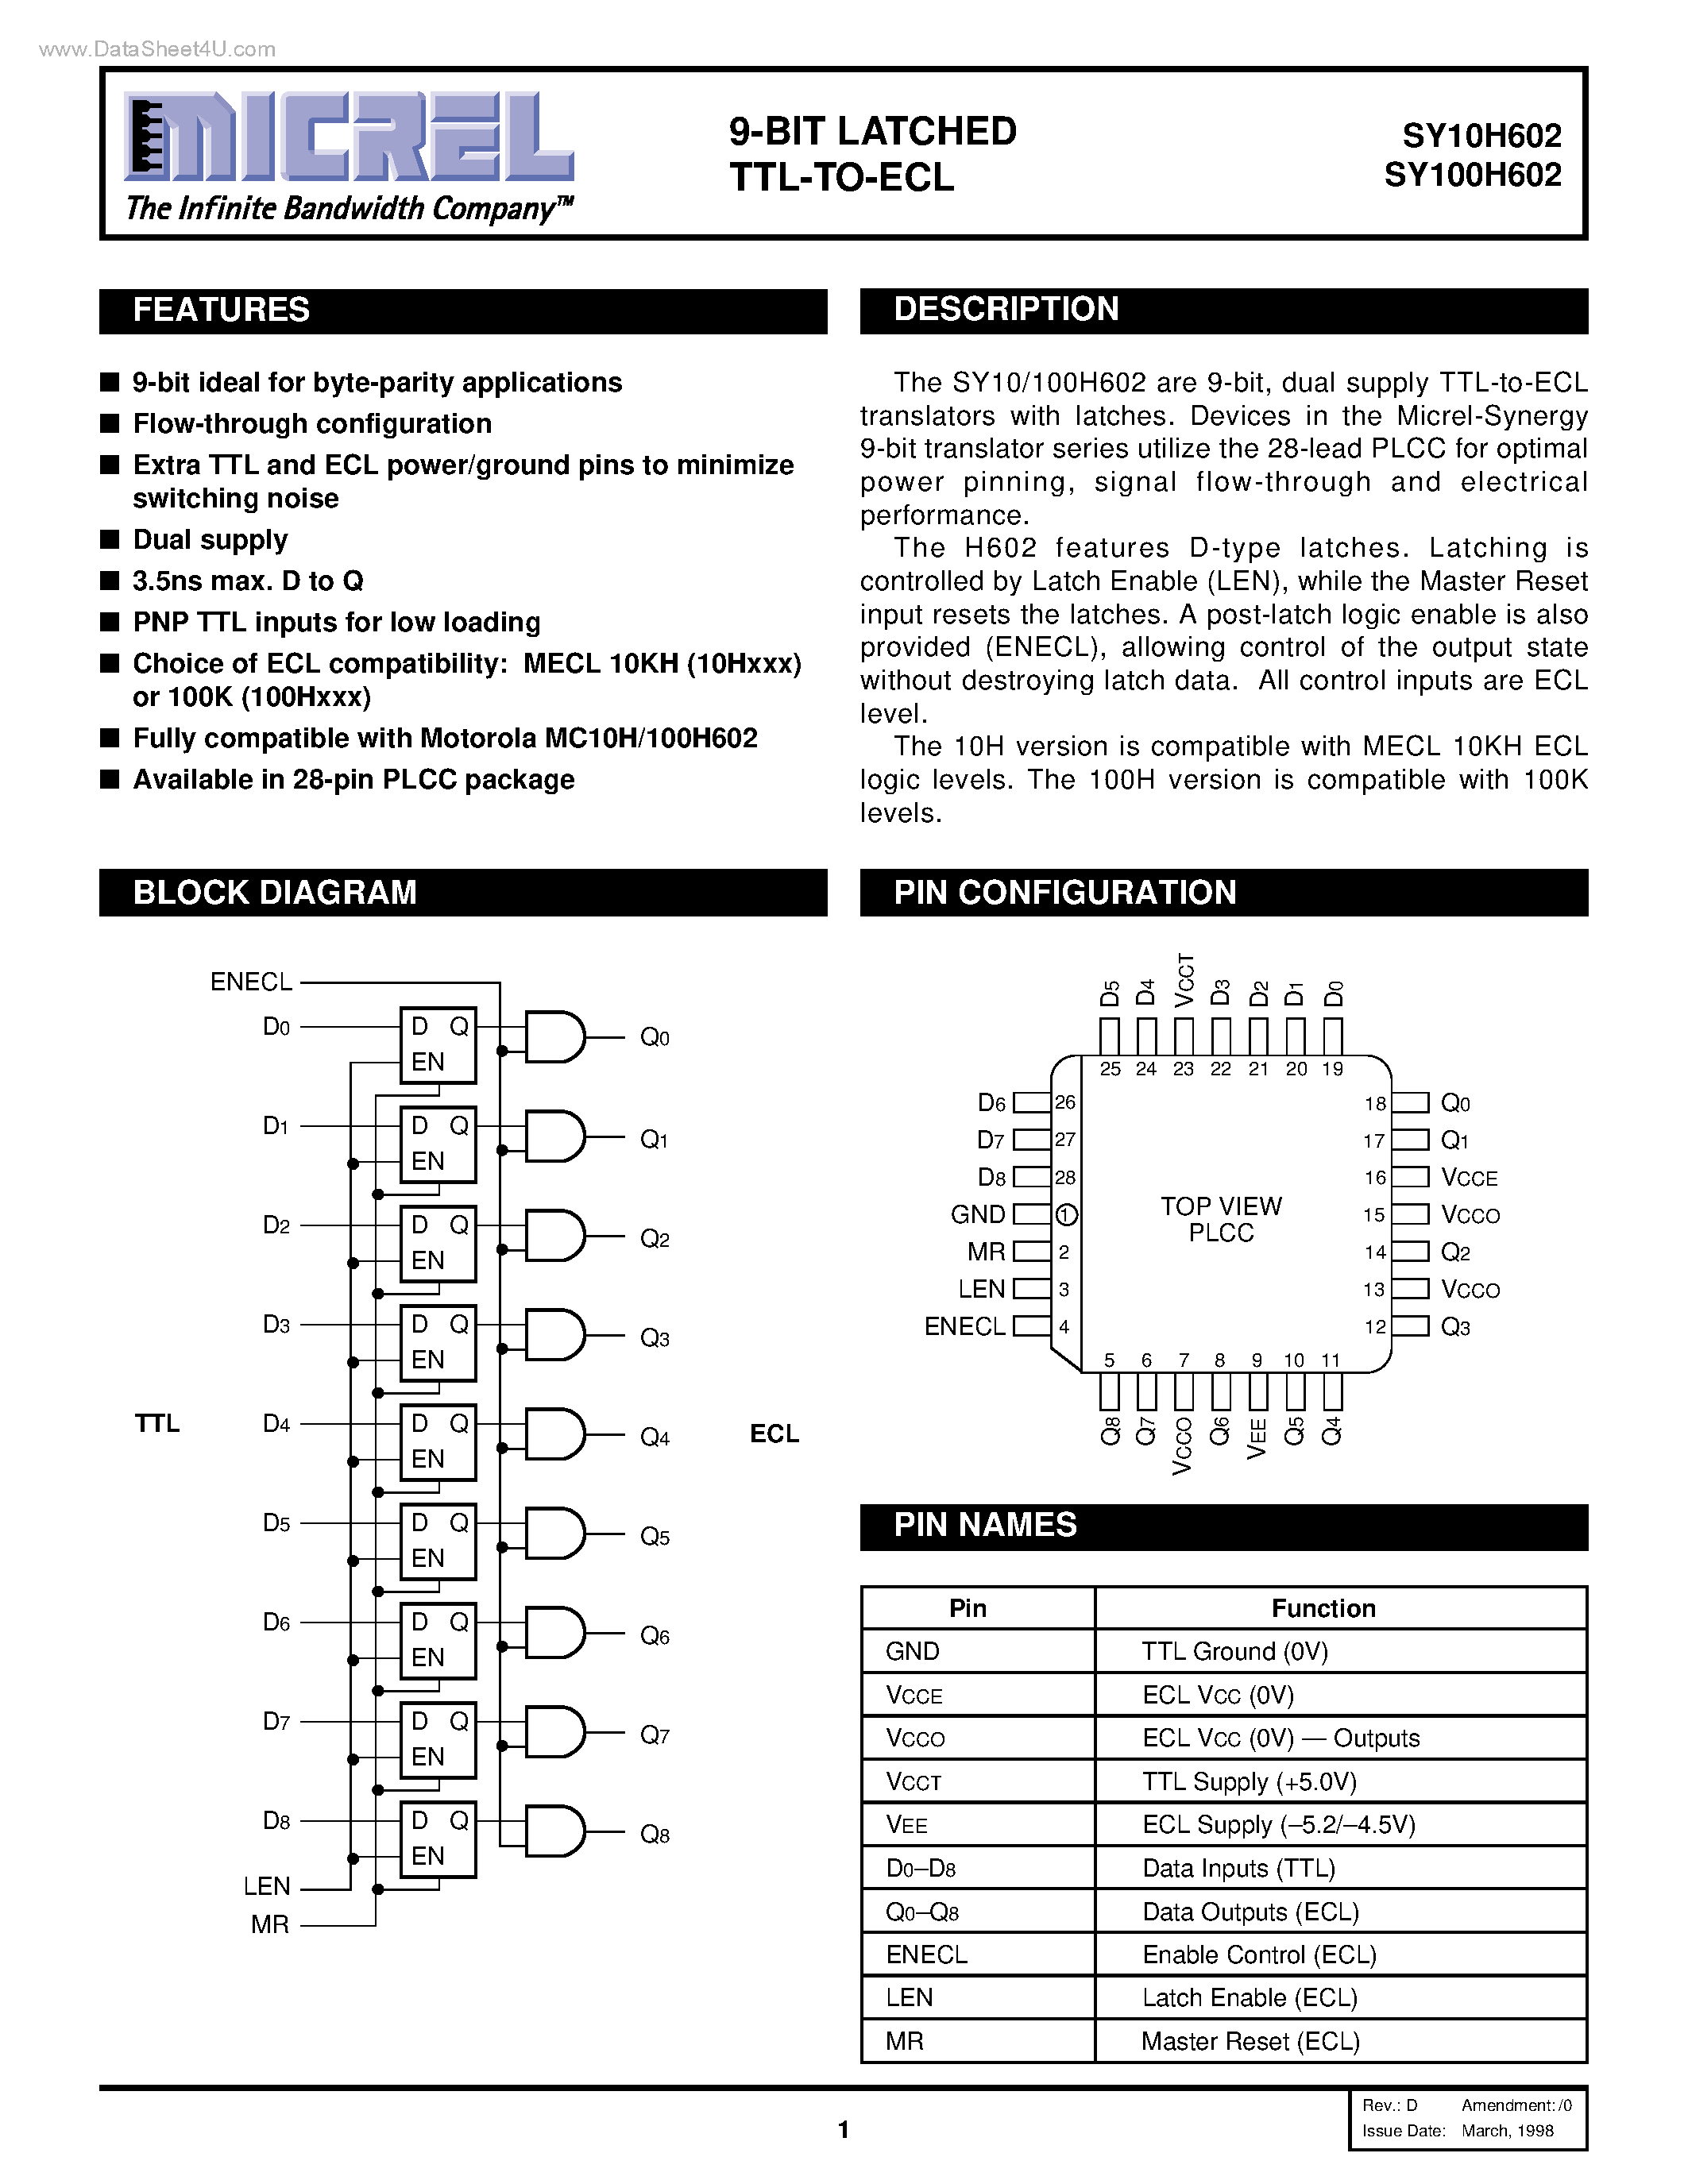 Datasheet SY100H602 - 9-BIT LATCHED page 1